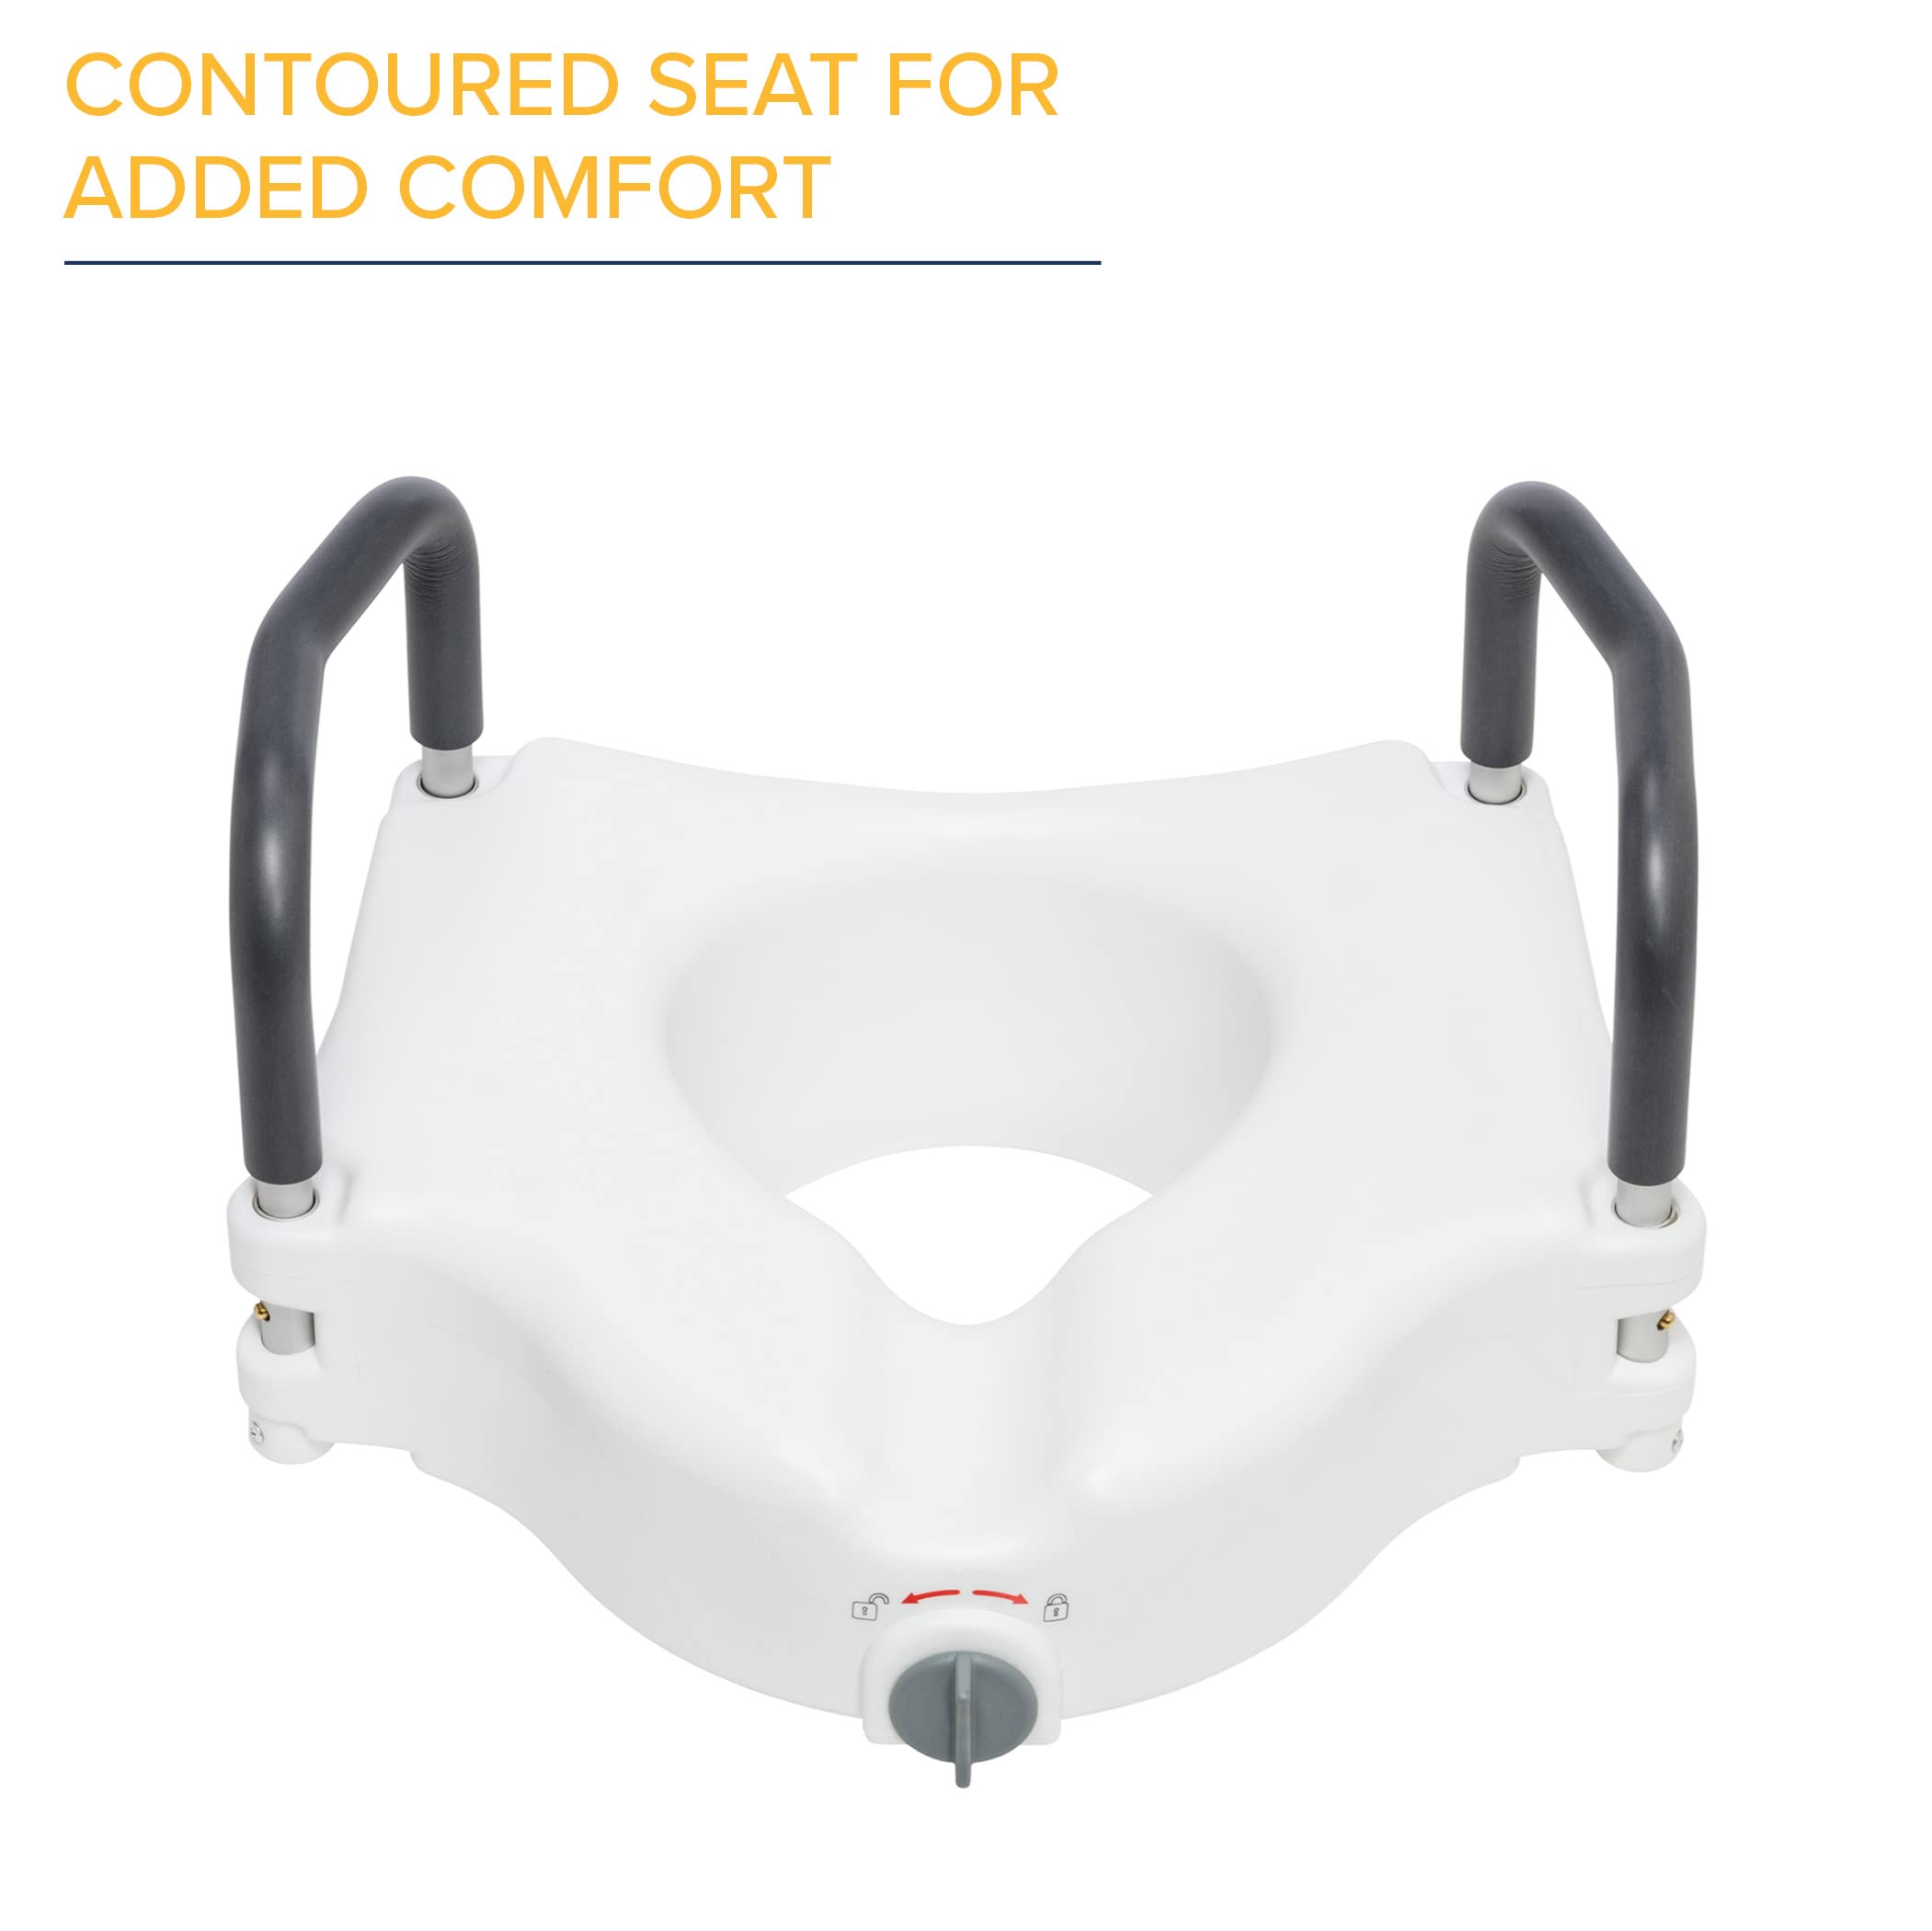 Drive Medical RTL12027RA 2-in-1 Raised Toilet Seat with Removable Padded Arms, Standard Seat